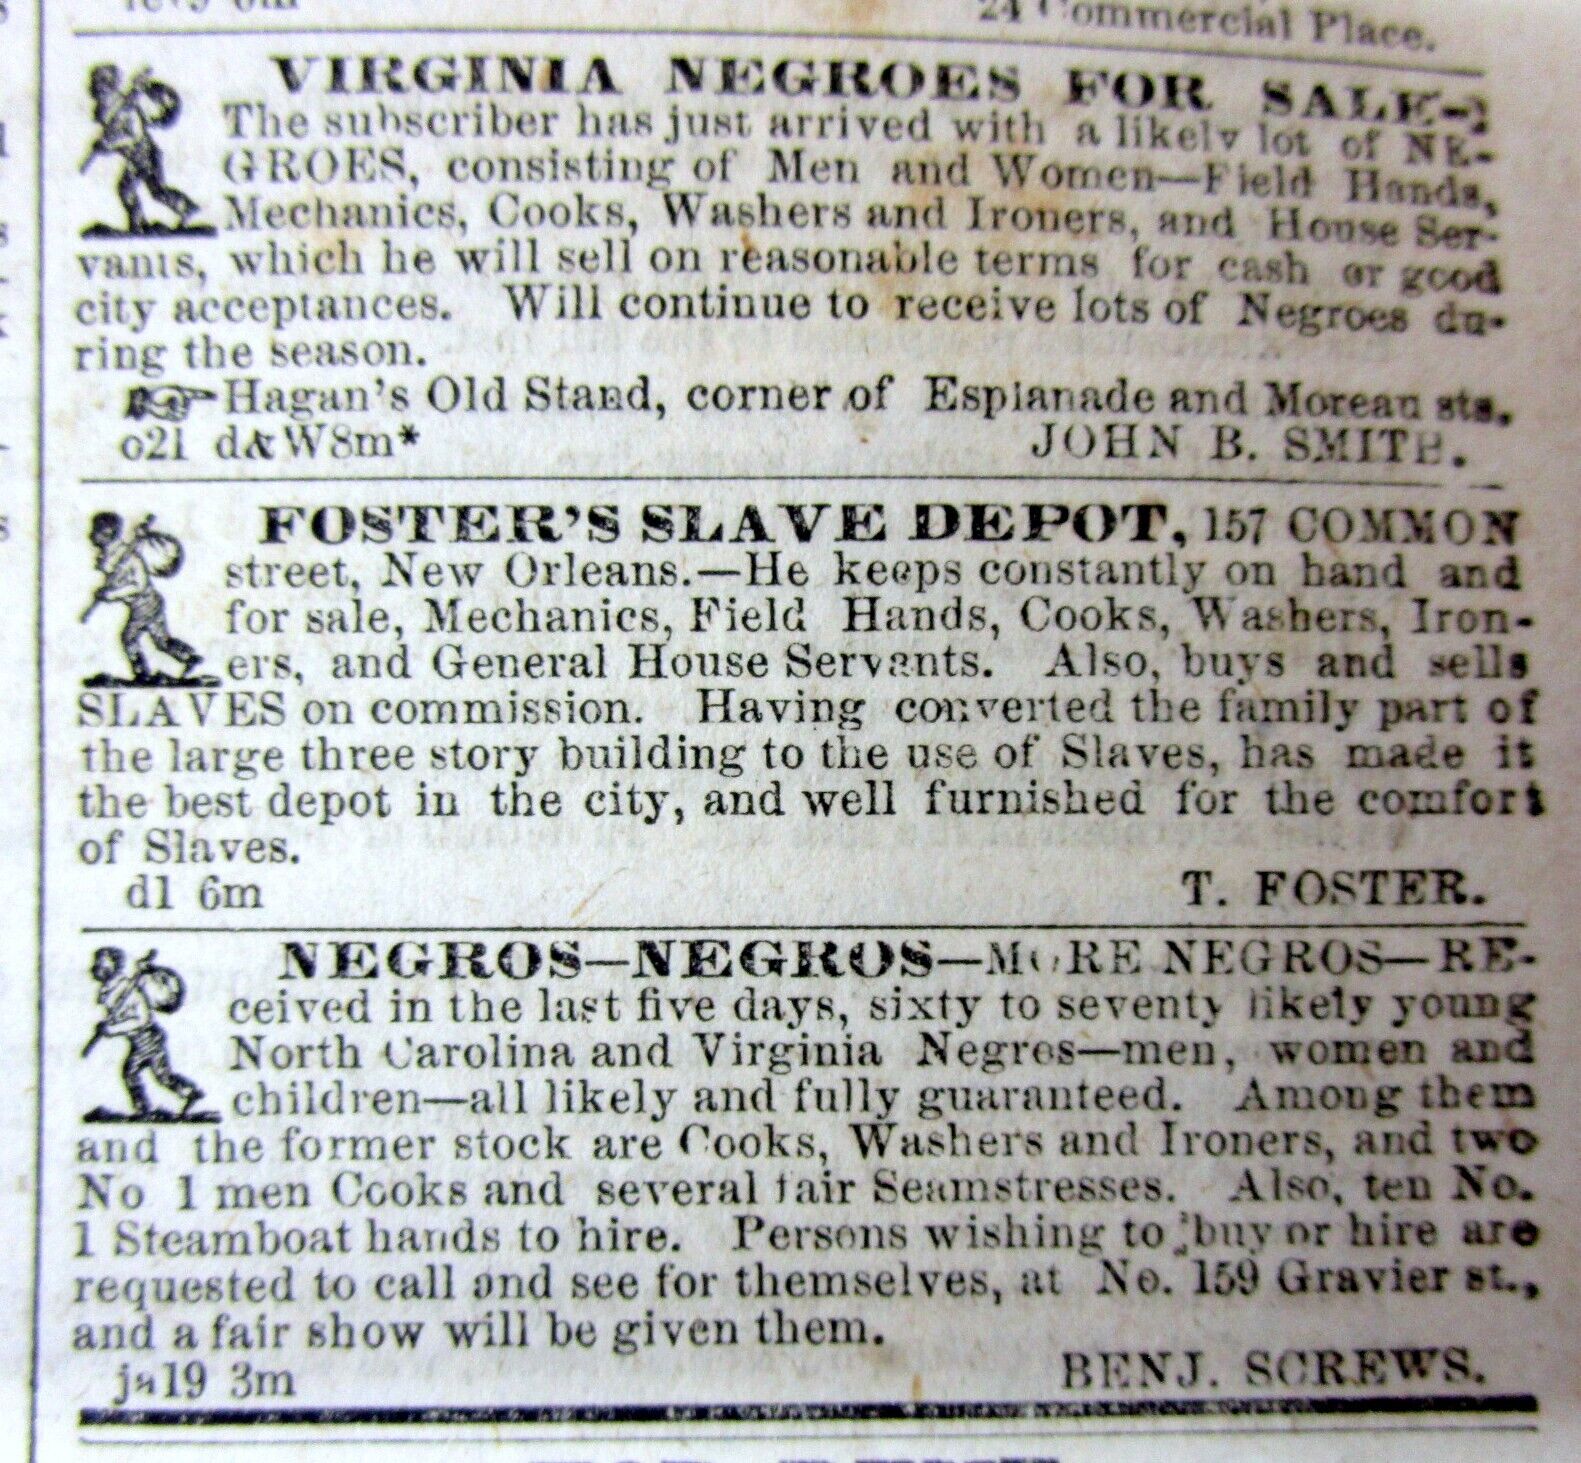 1852 NEW ORLEANS LOUISIANA newspaper w 4 ADS for AUCTION SALE of NEGR0 SLAVES